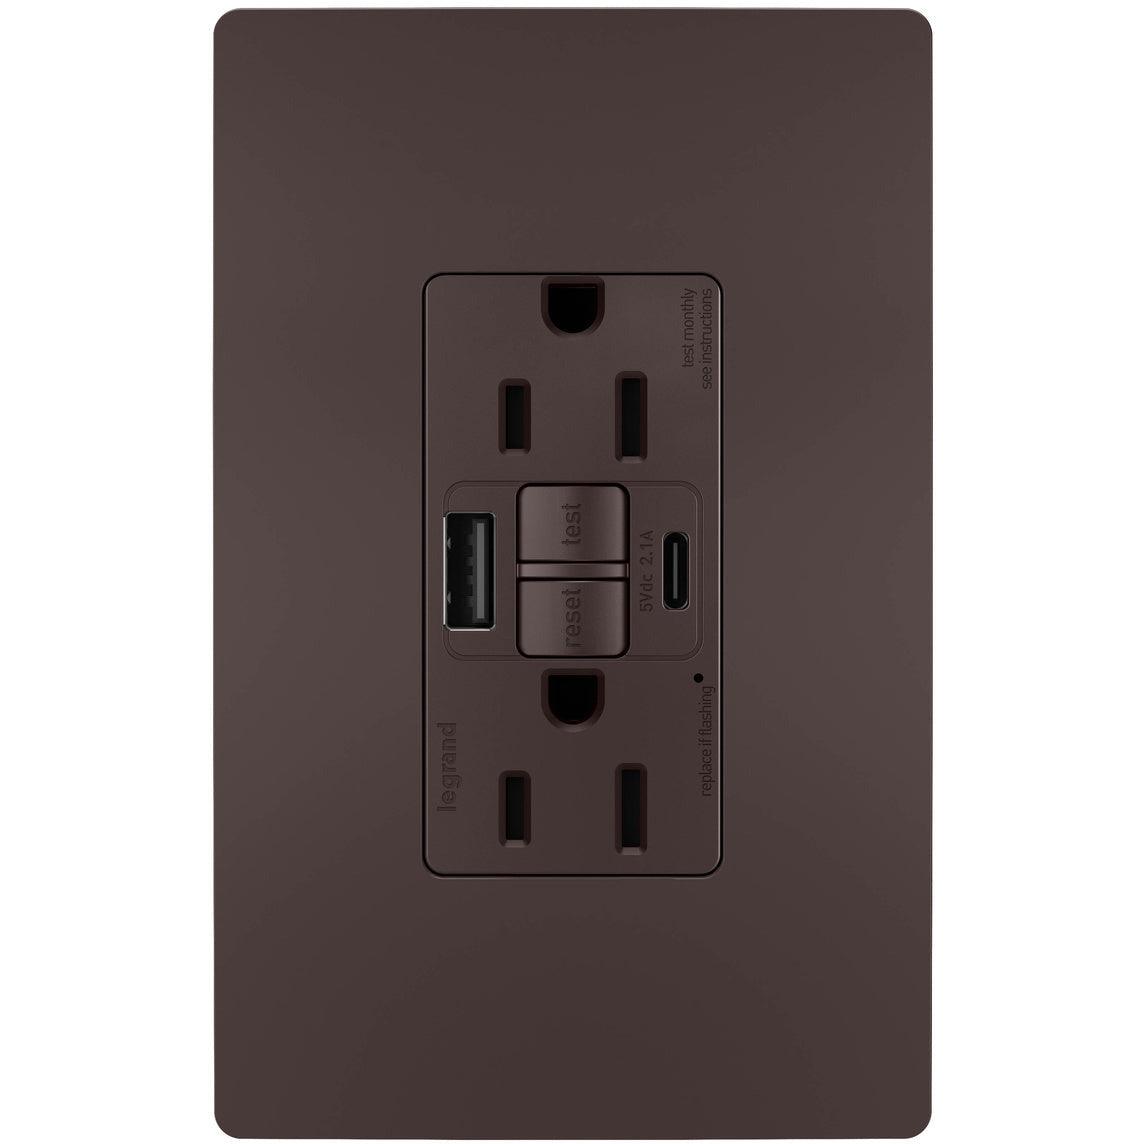 Legrand Radiant - radiant® 15A Tamper Resistant Self Test GFCI USB Type AC Outlet - 1597TRUSBACDBC4 | Montreal Lighting & Hardware